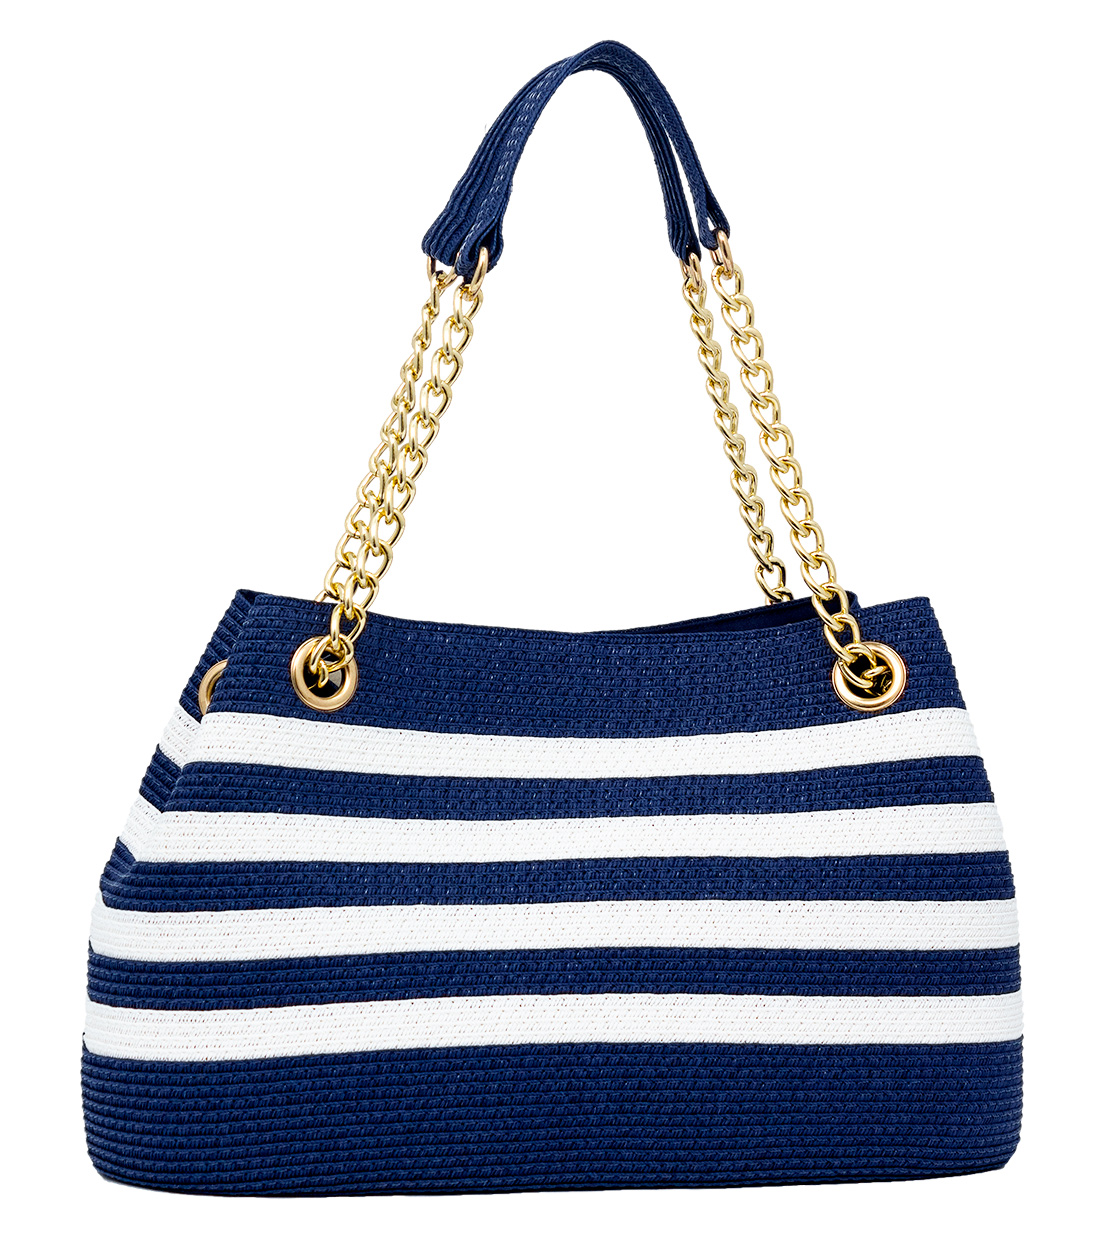 Magid Women's Adult Paper Straw Beach Handbag with Gold Chain Navy White - image 1 of 4